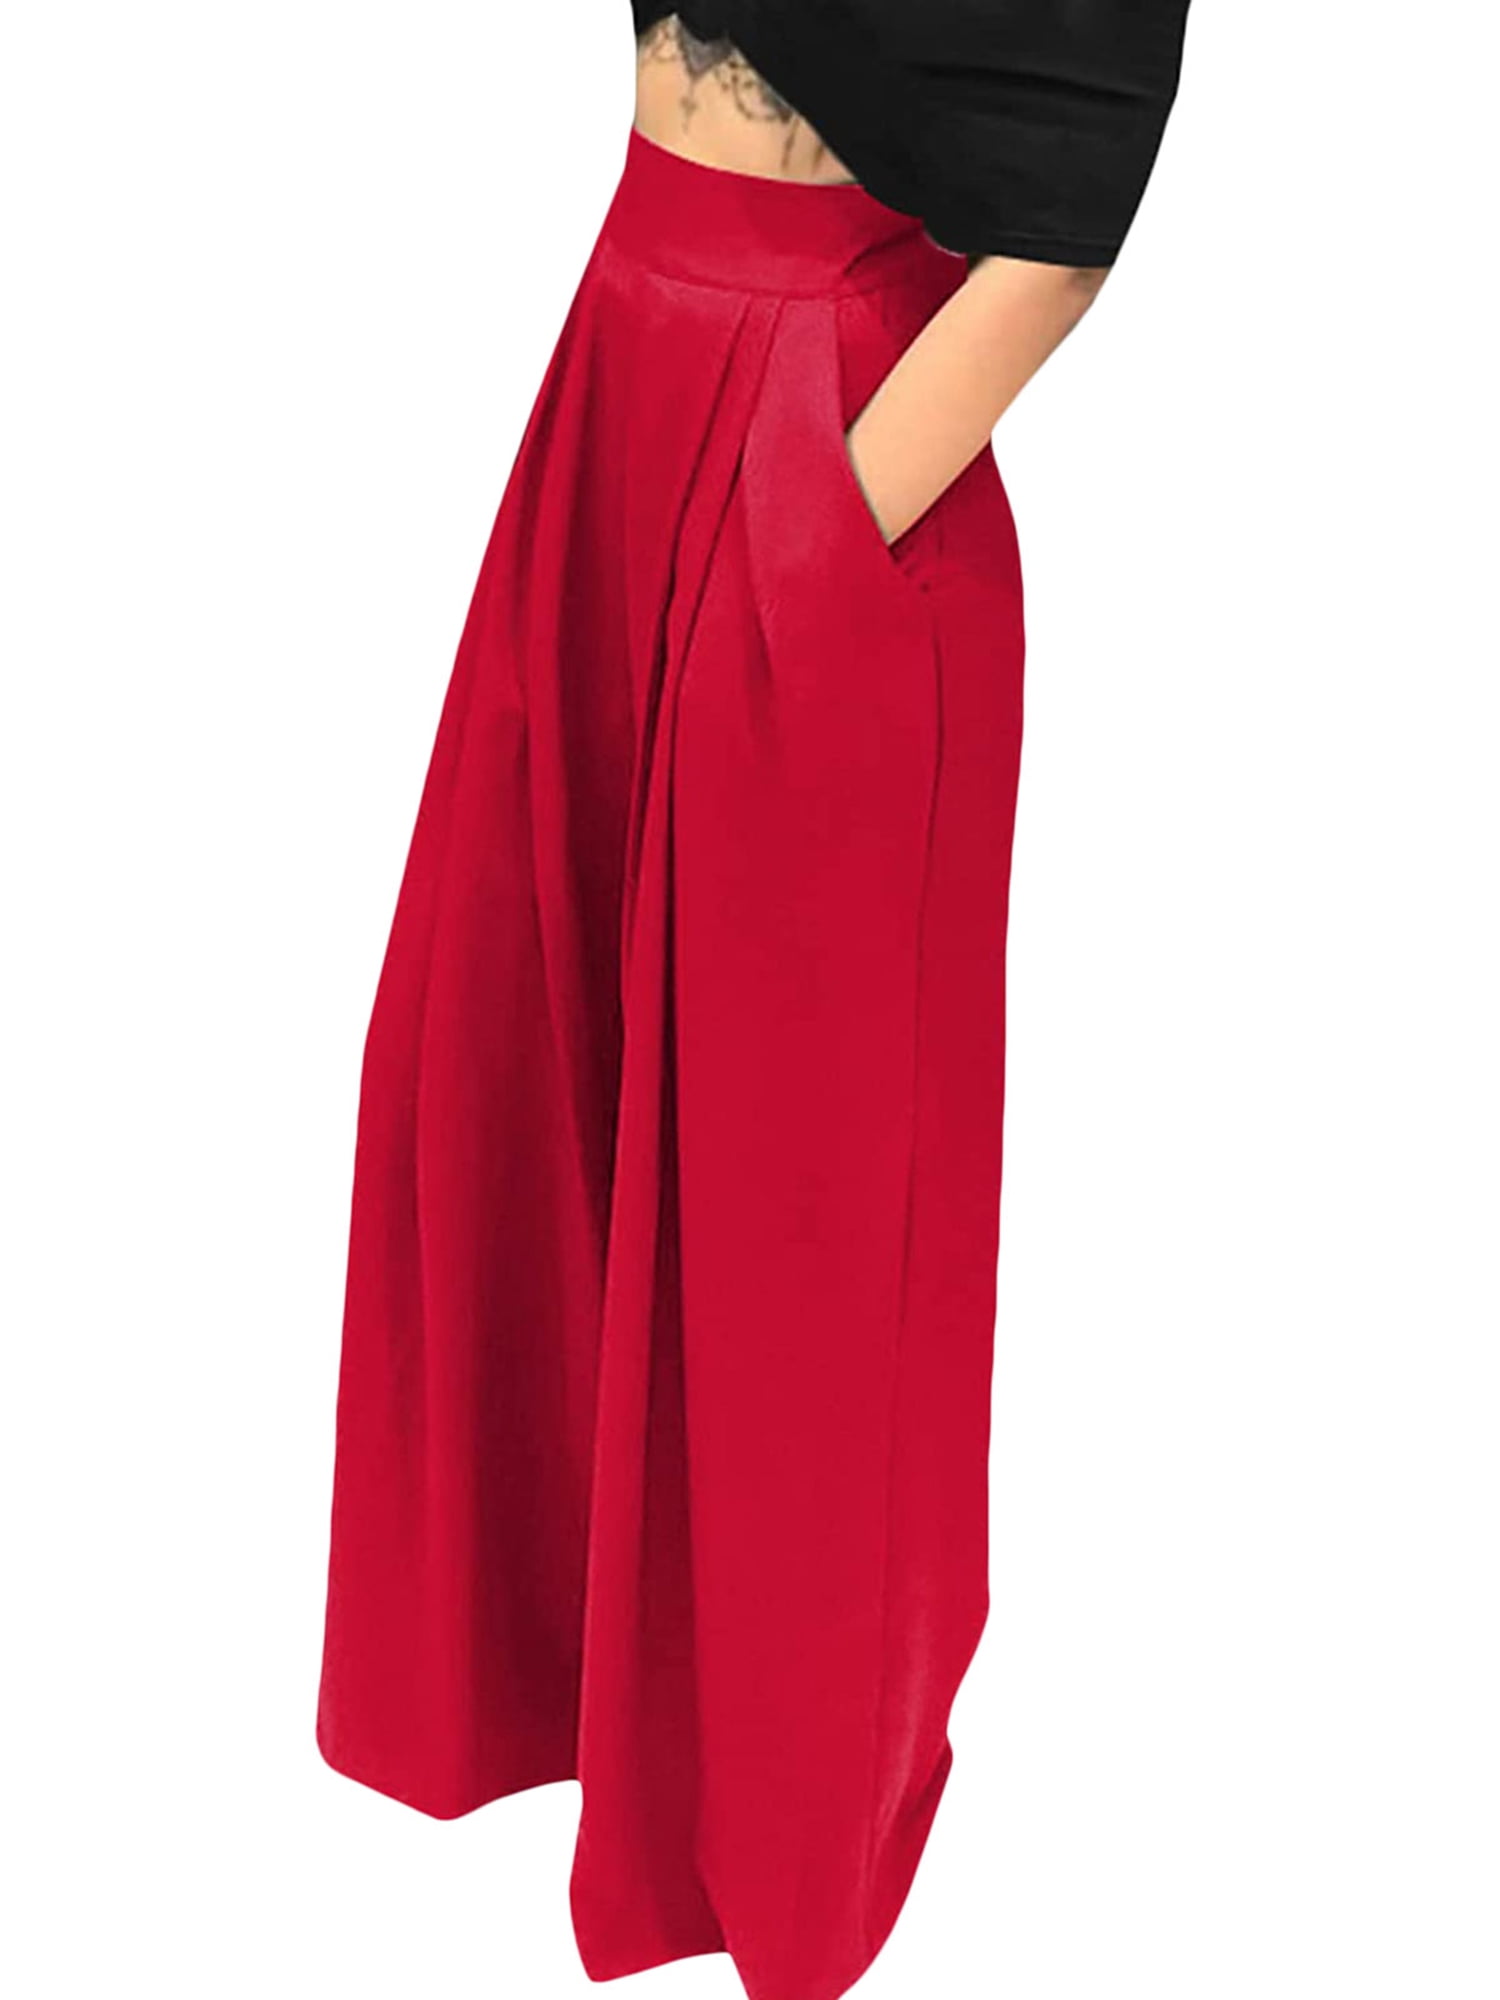 Buy Chic Attire Women's Cotton Solid Palazzo Pants Color Off-White Size XL  at Amazon.in